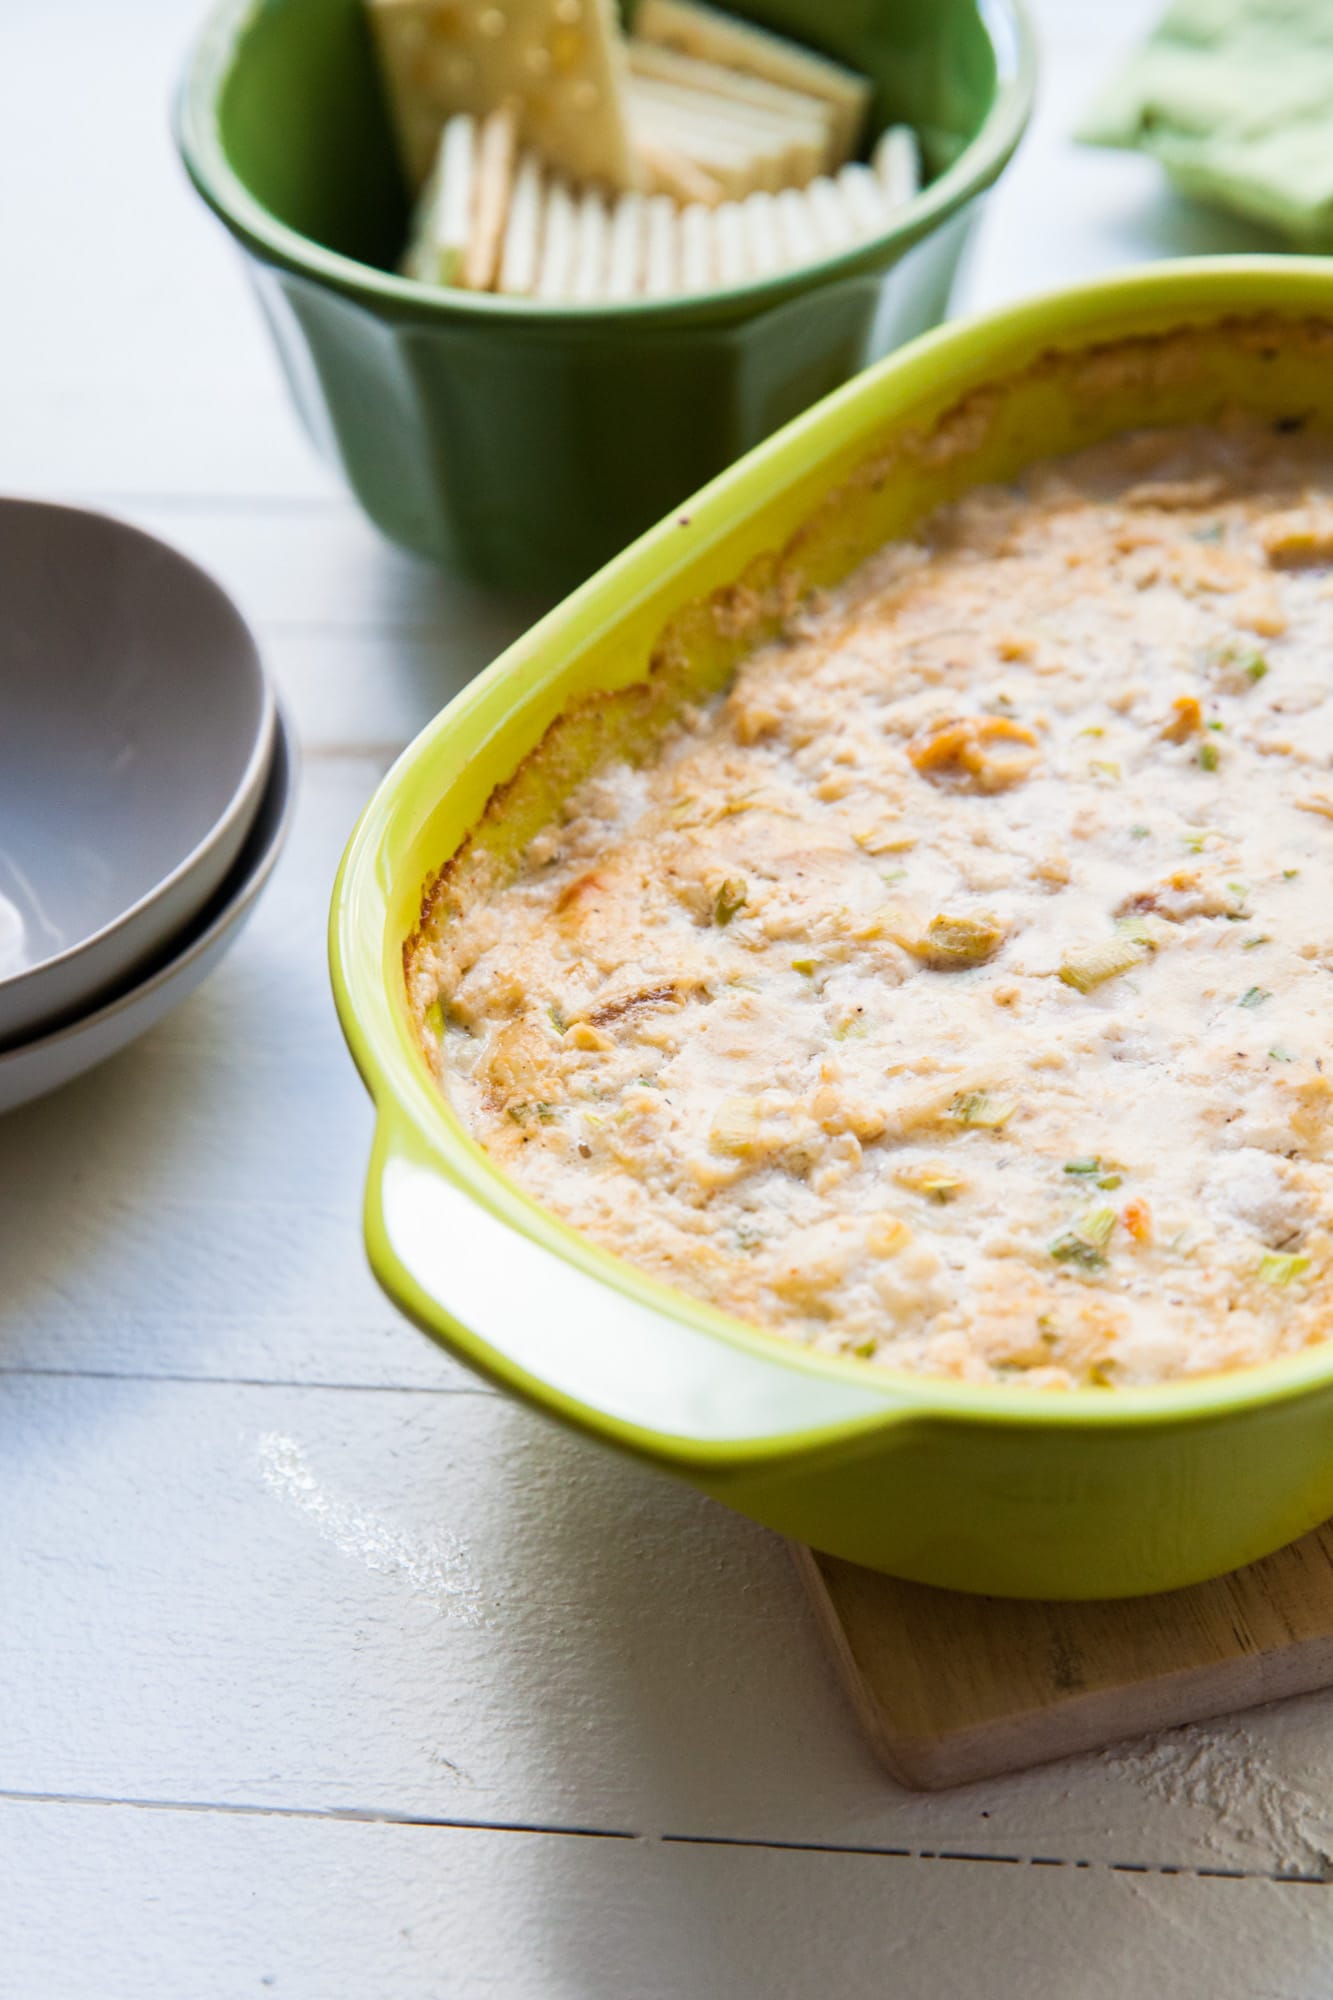 Hot crab dip in a yellow serving dish.